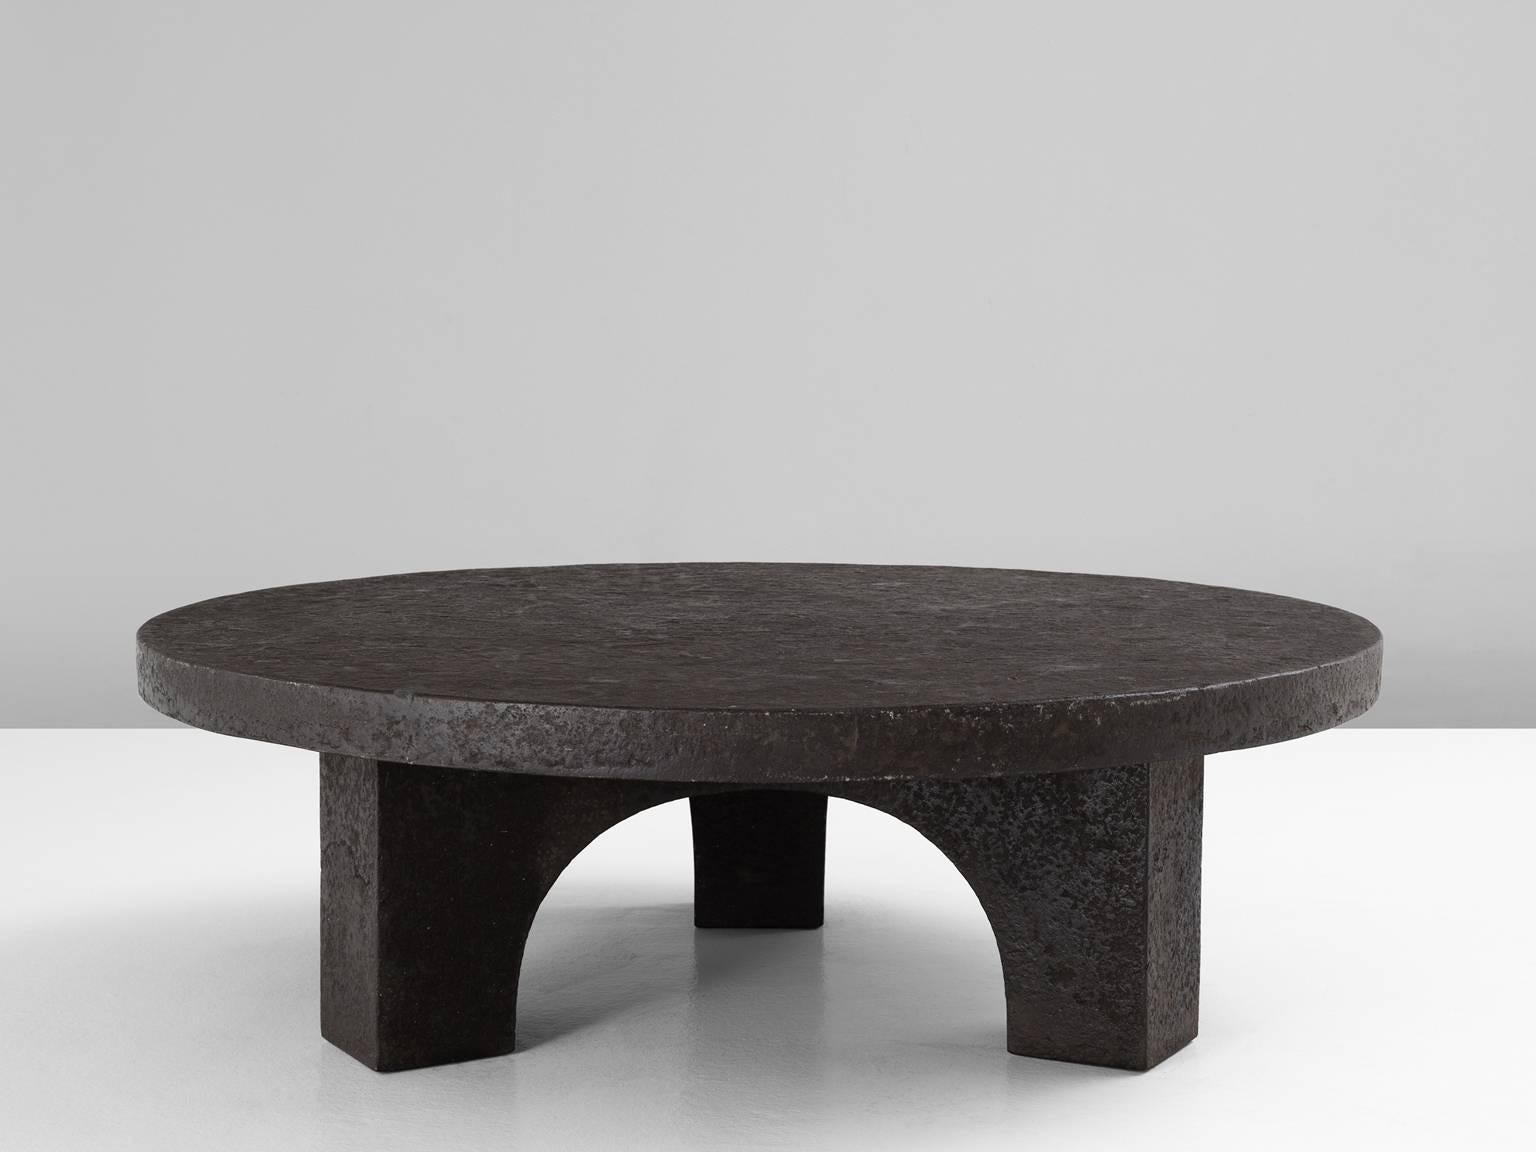 Cocktail table in stone, Europe, 1970s. 

Round coffee table in stone. This table has an interesting appearance, the grey stone looks like cast iron. The round top is supported by three legs, which shows nice lines and are formed into arches.